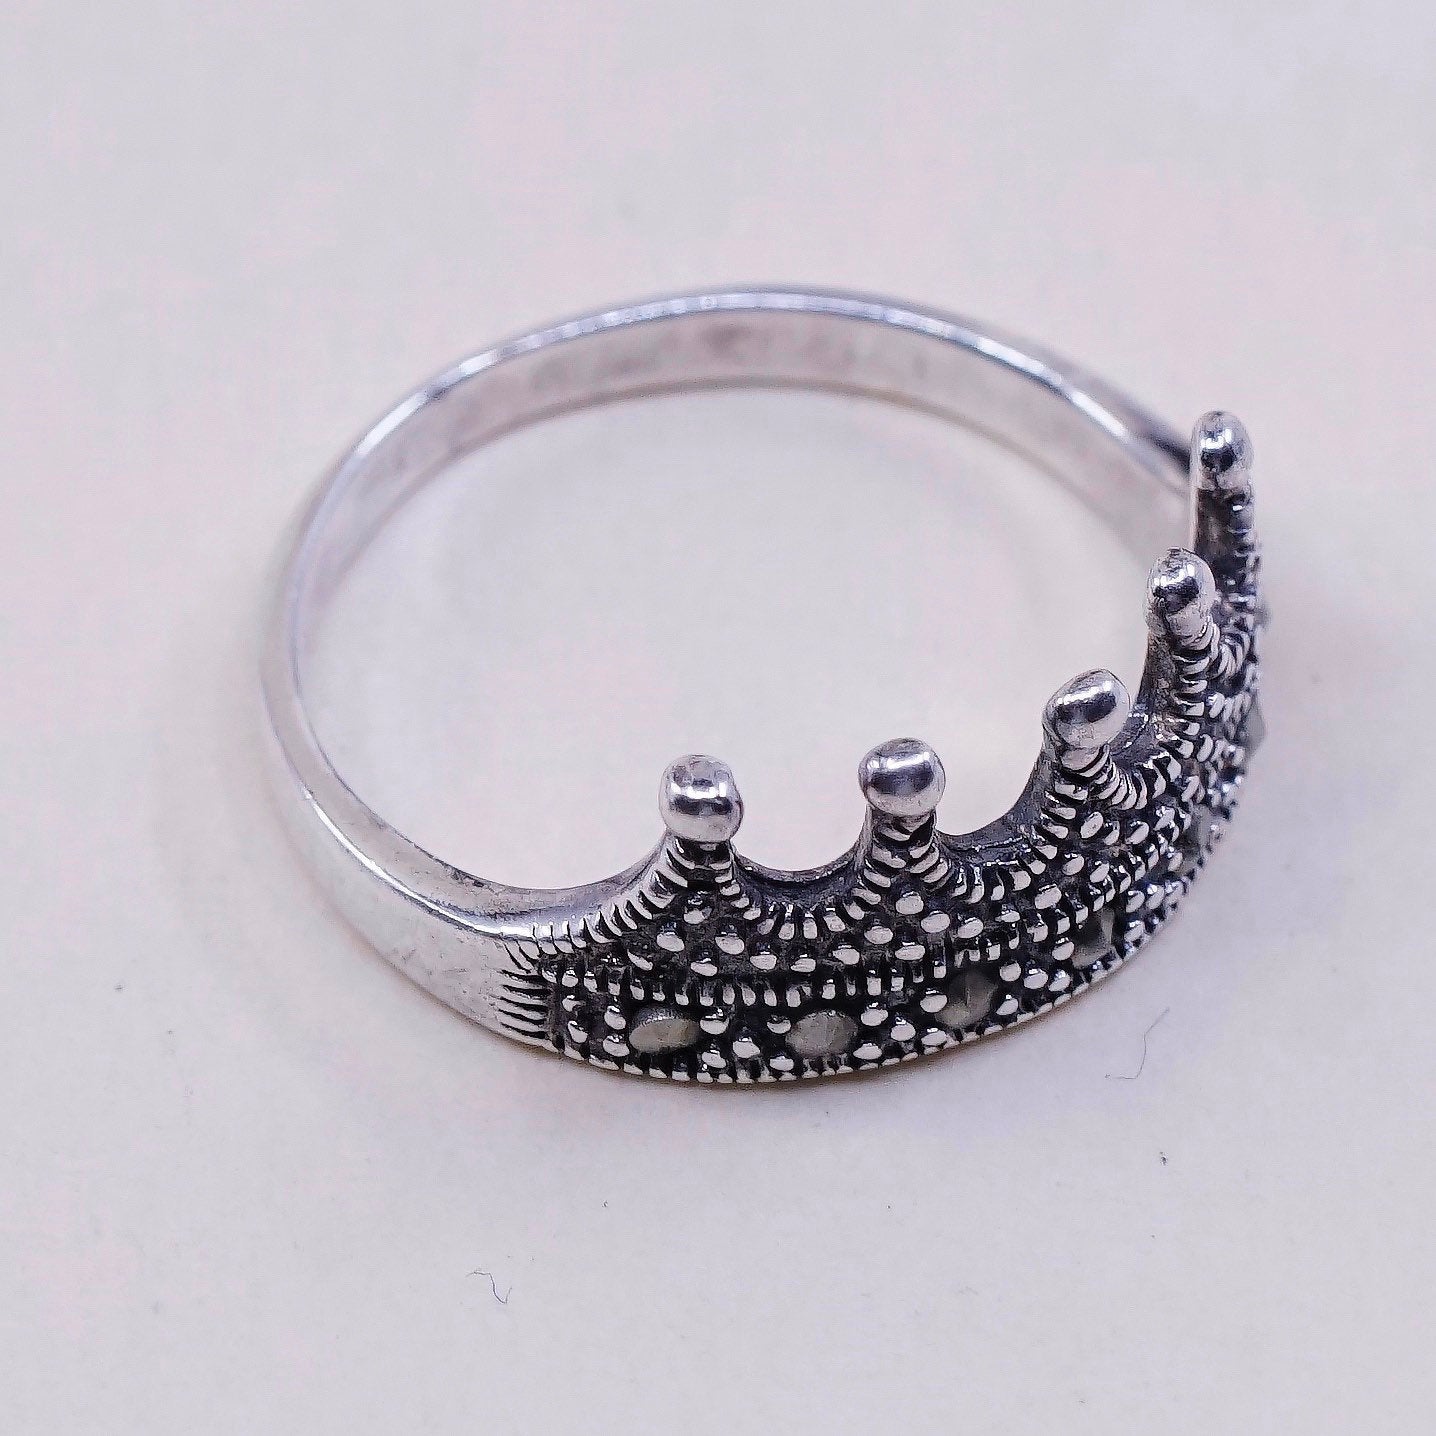 Size 7, vintage Sterling silver handmade ring, 925 silver crown with marcasite